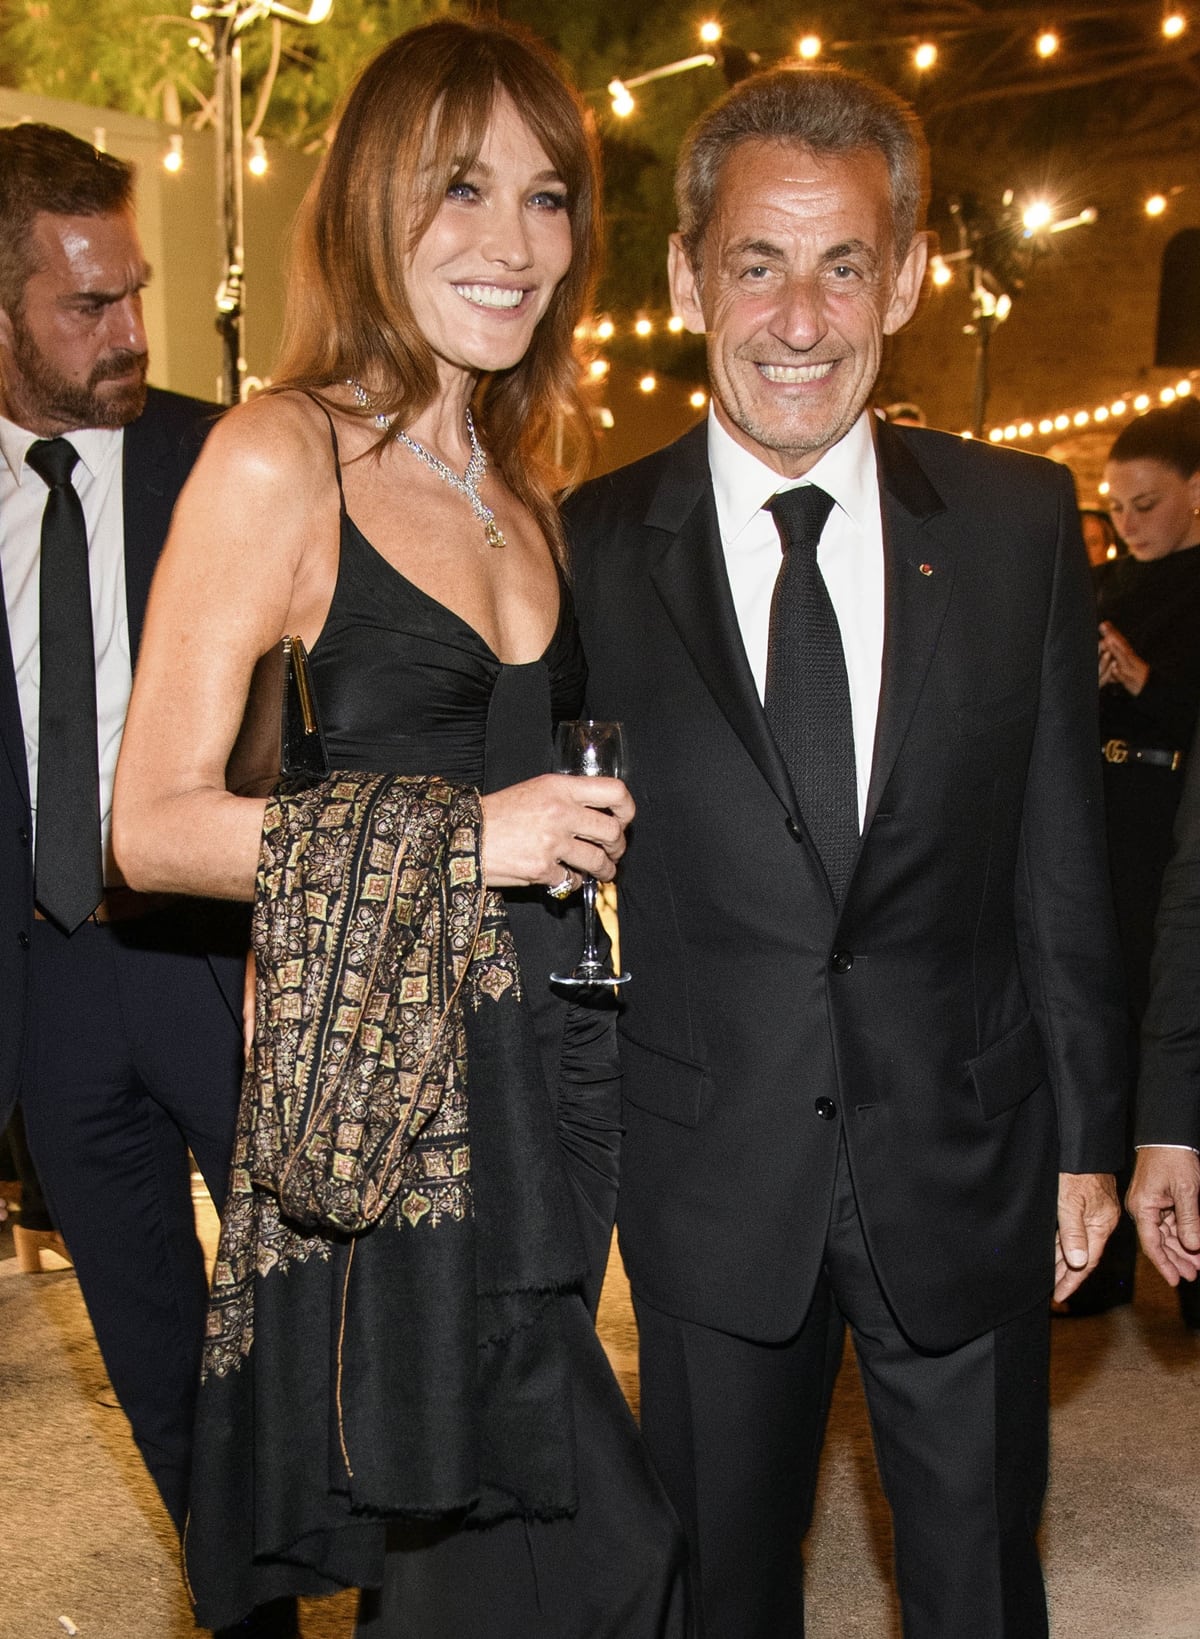 Mick Jagger's ex-girlfriend Carla Bruni ended up marrying French President Nicolas Sarkozy